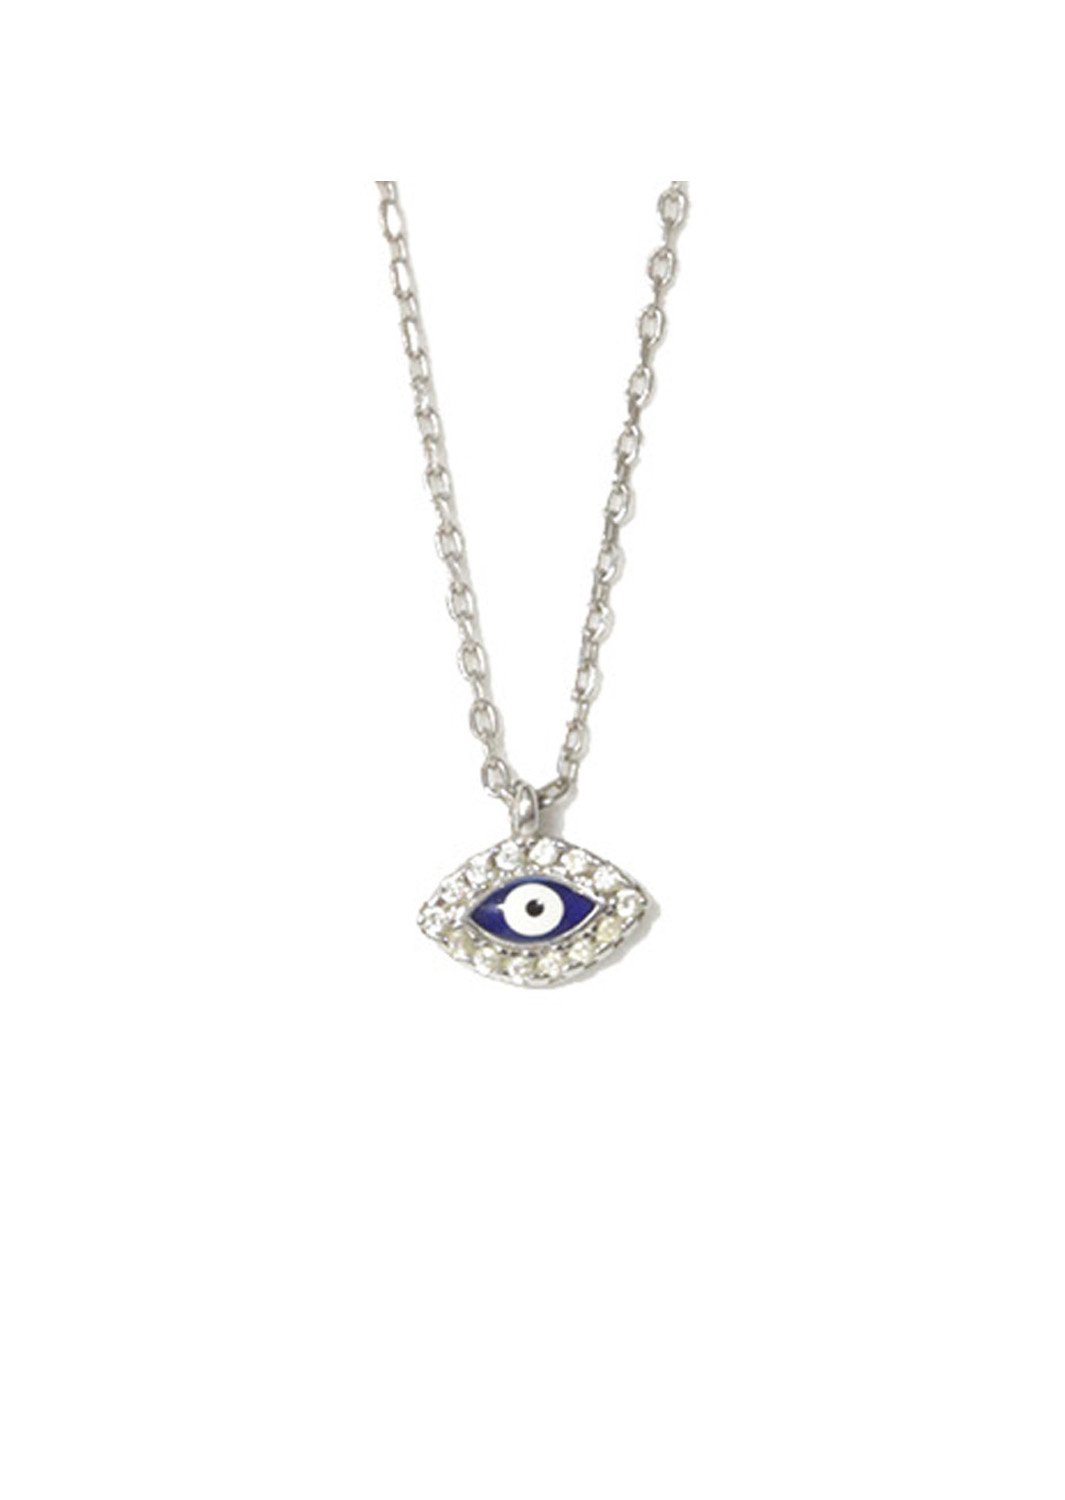 Evil eye silver necklace with zircon